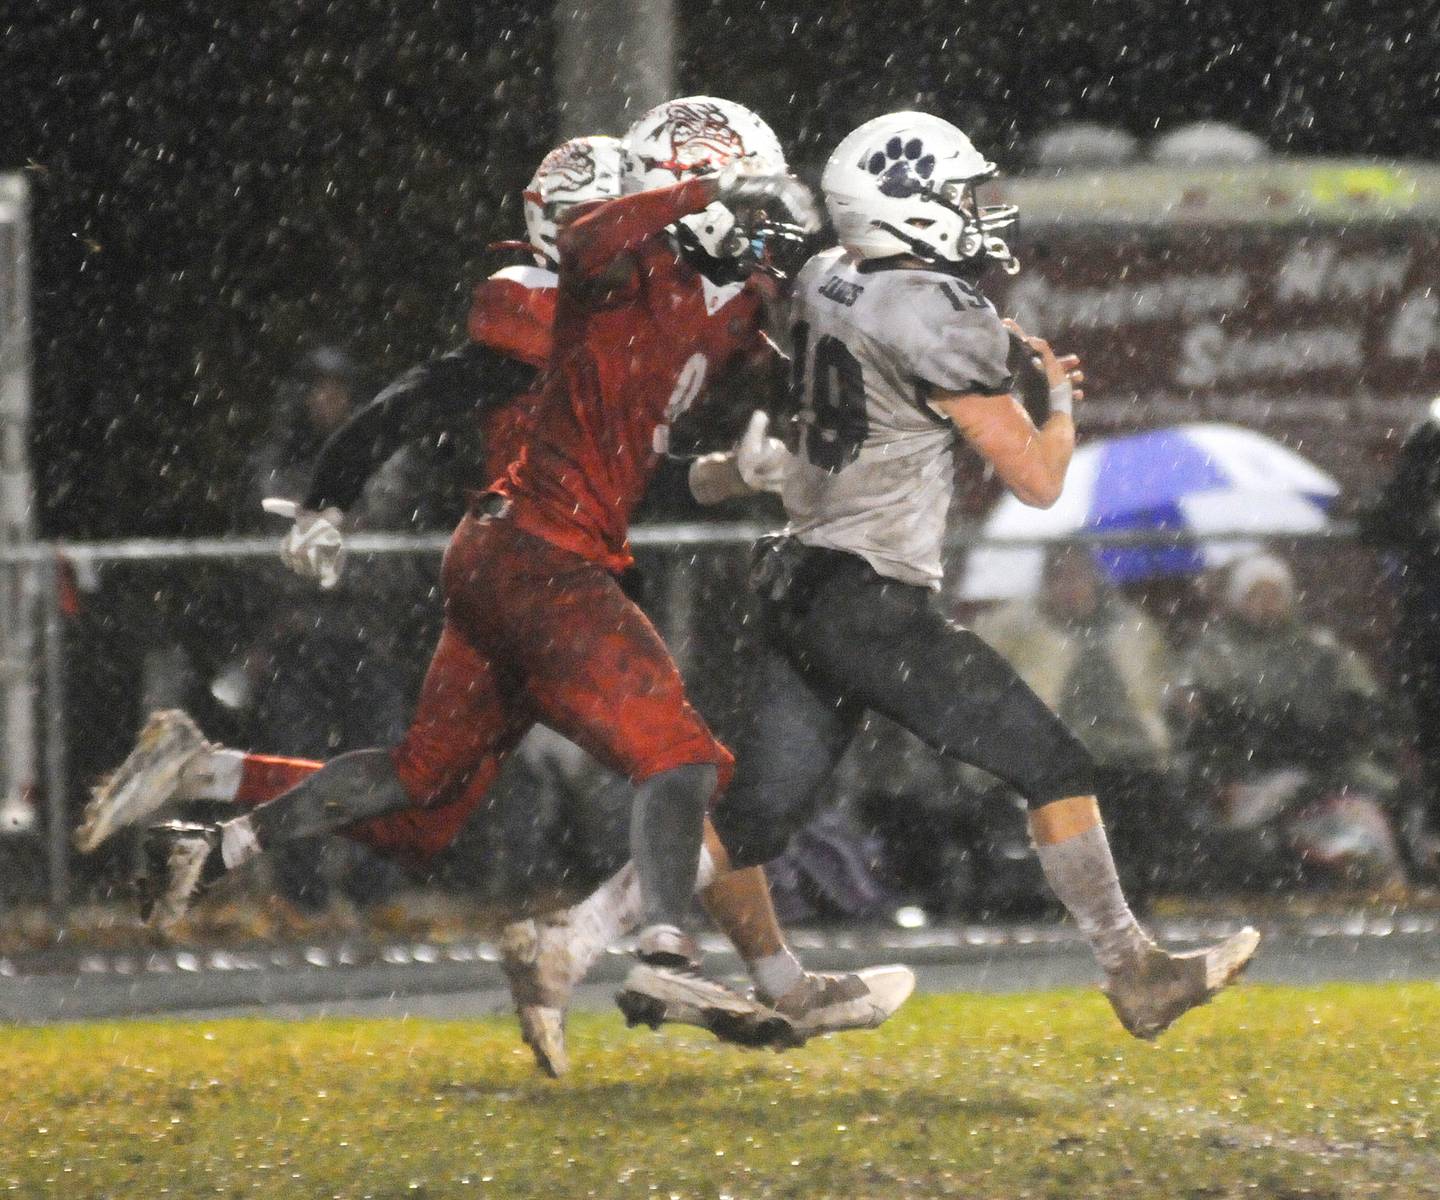 Streator's Aneefy Ford (9) runs down Wilmington's Colin James (19) after a 38-yard run as heavy rain falls at Doug Dieken Stadium on Friday, Oct. 14, 2022, in Streator.